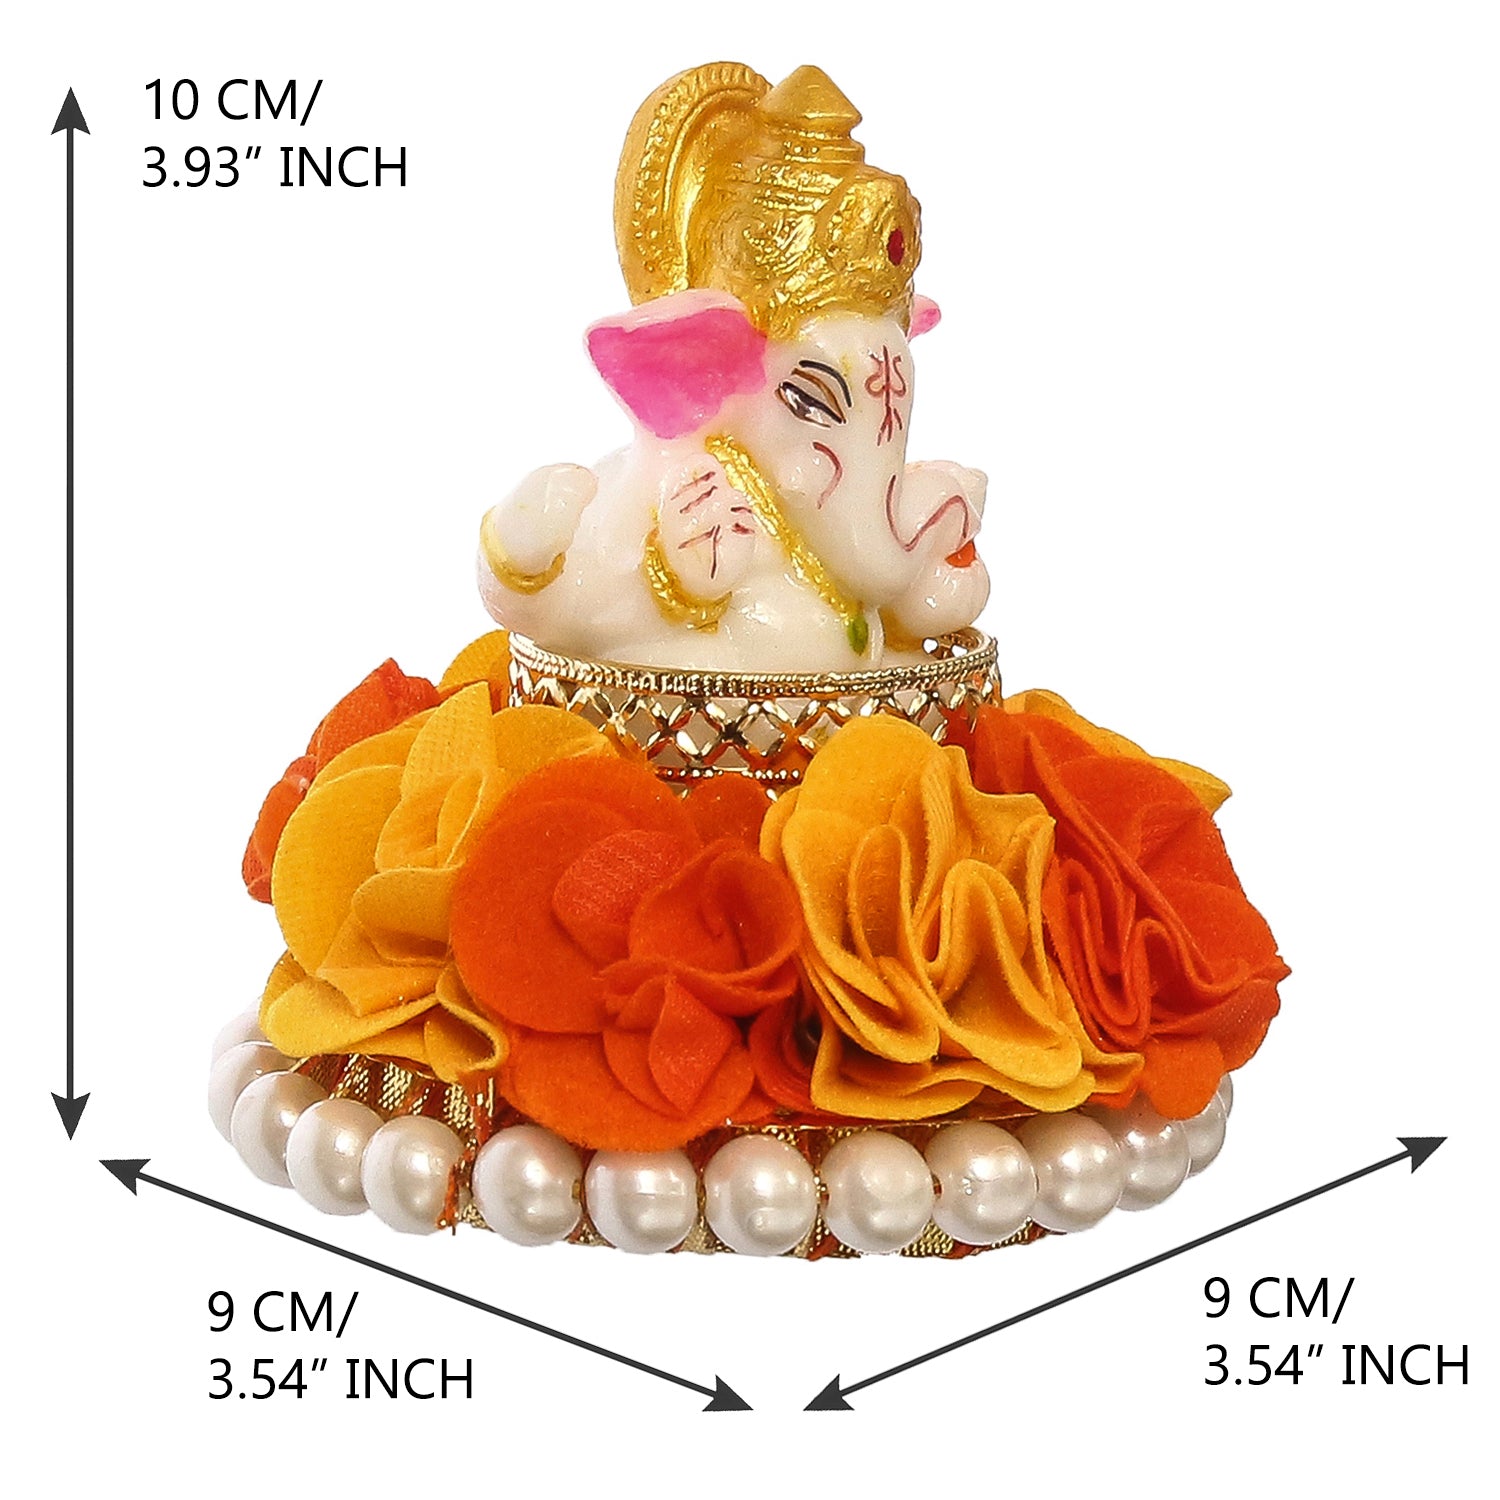 Lord Ganesha Idol On Decorative Handcrafted Orange And Yellow Flowers Plate 3